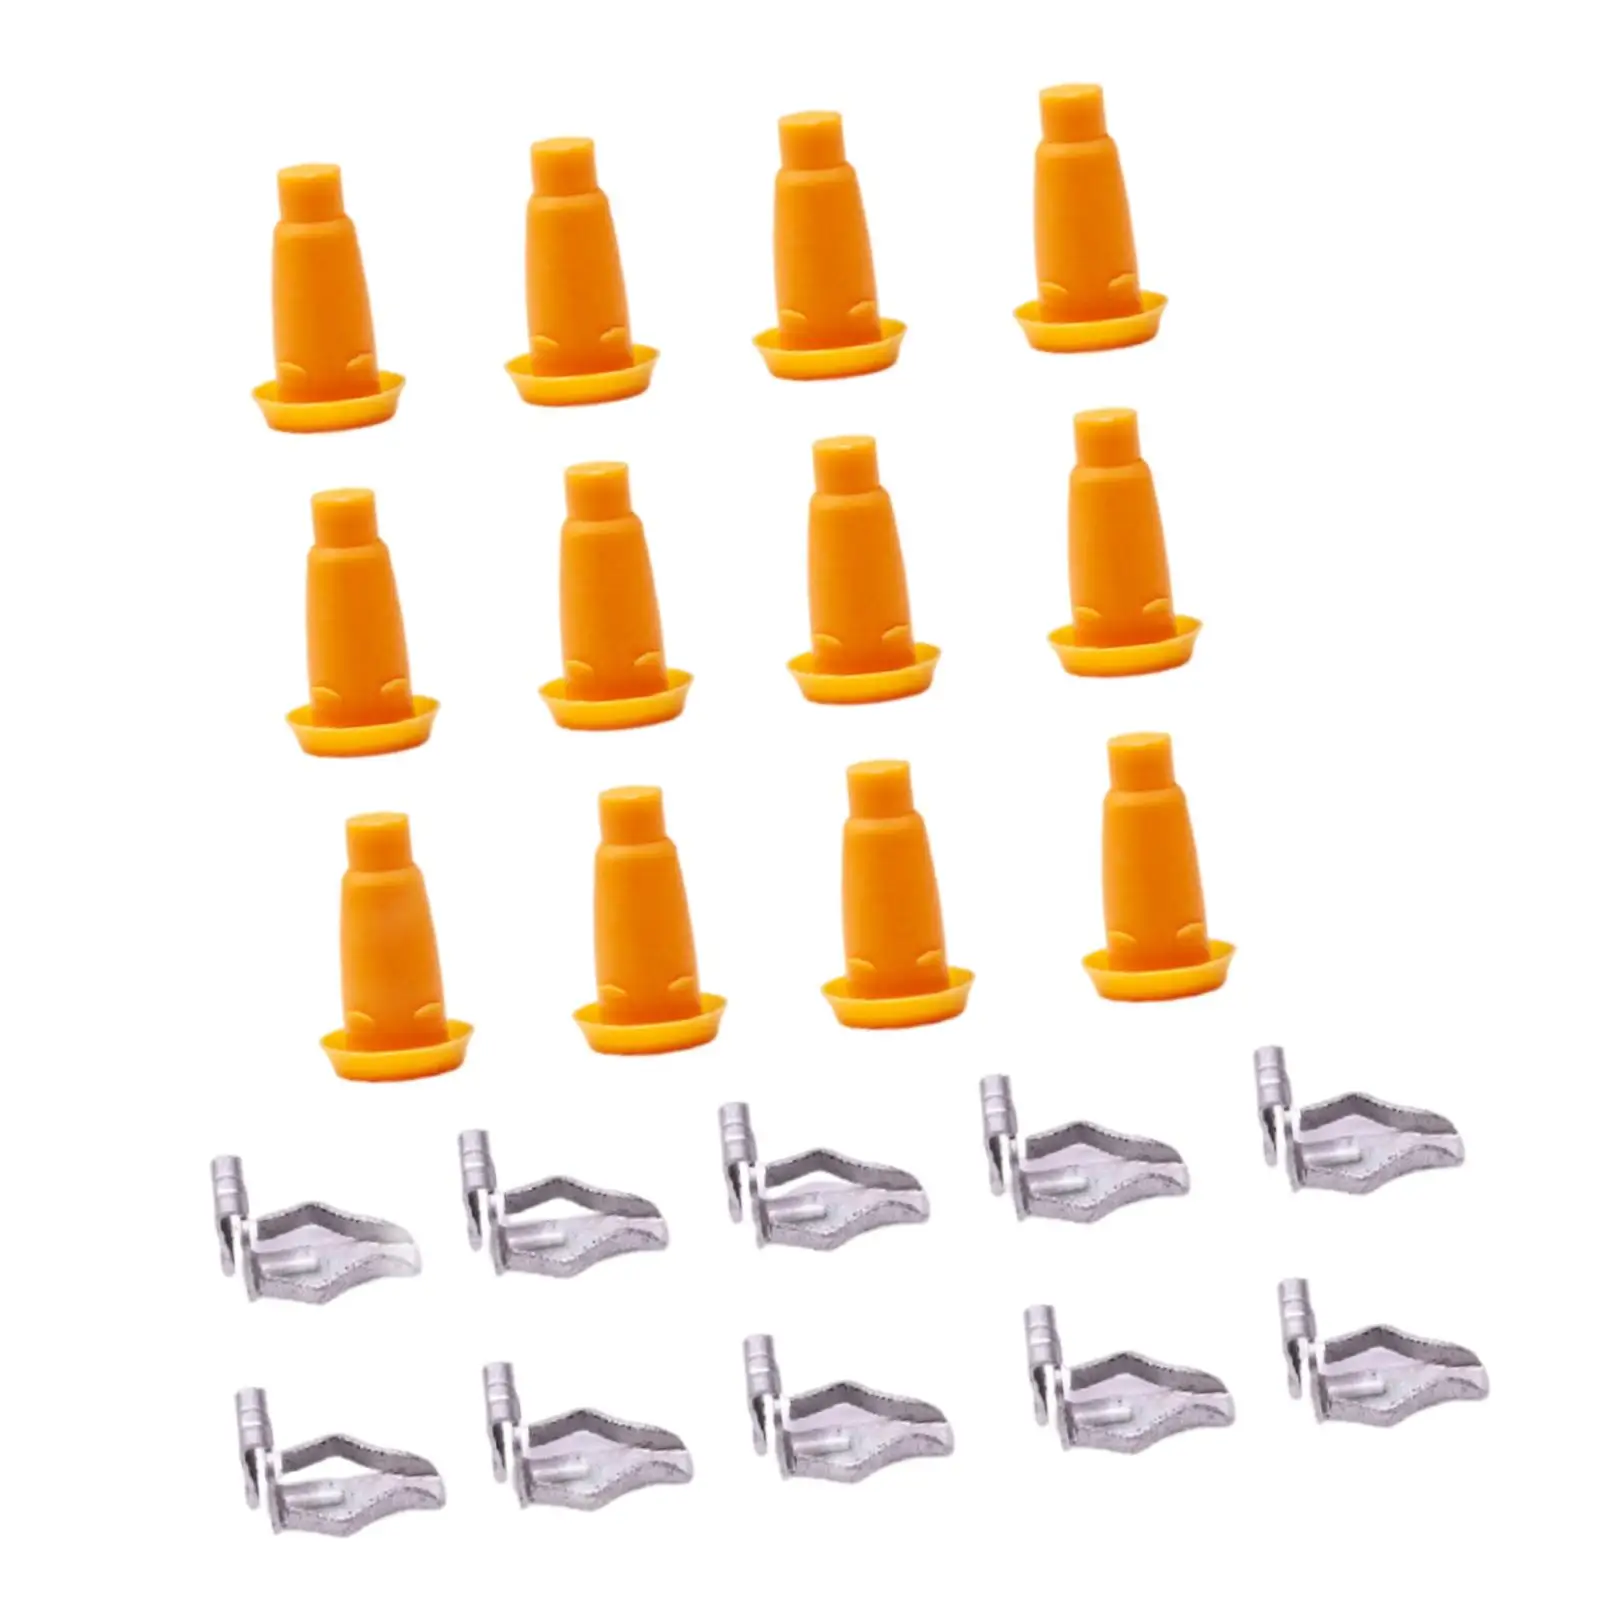 24Pcs Front Door Panel Clip Frame Plugs Clips Kit Repair Kit for Chevy Camaro Corvair Chevelle Fullsize Easy Installation